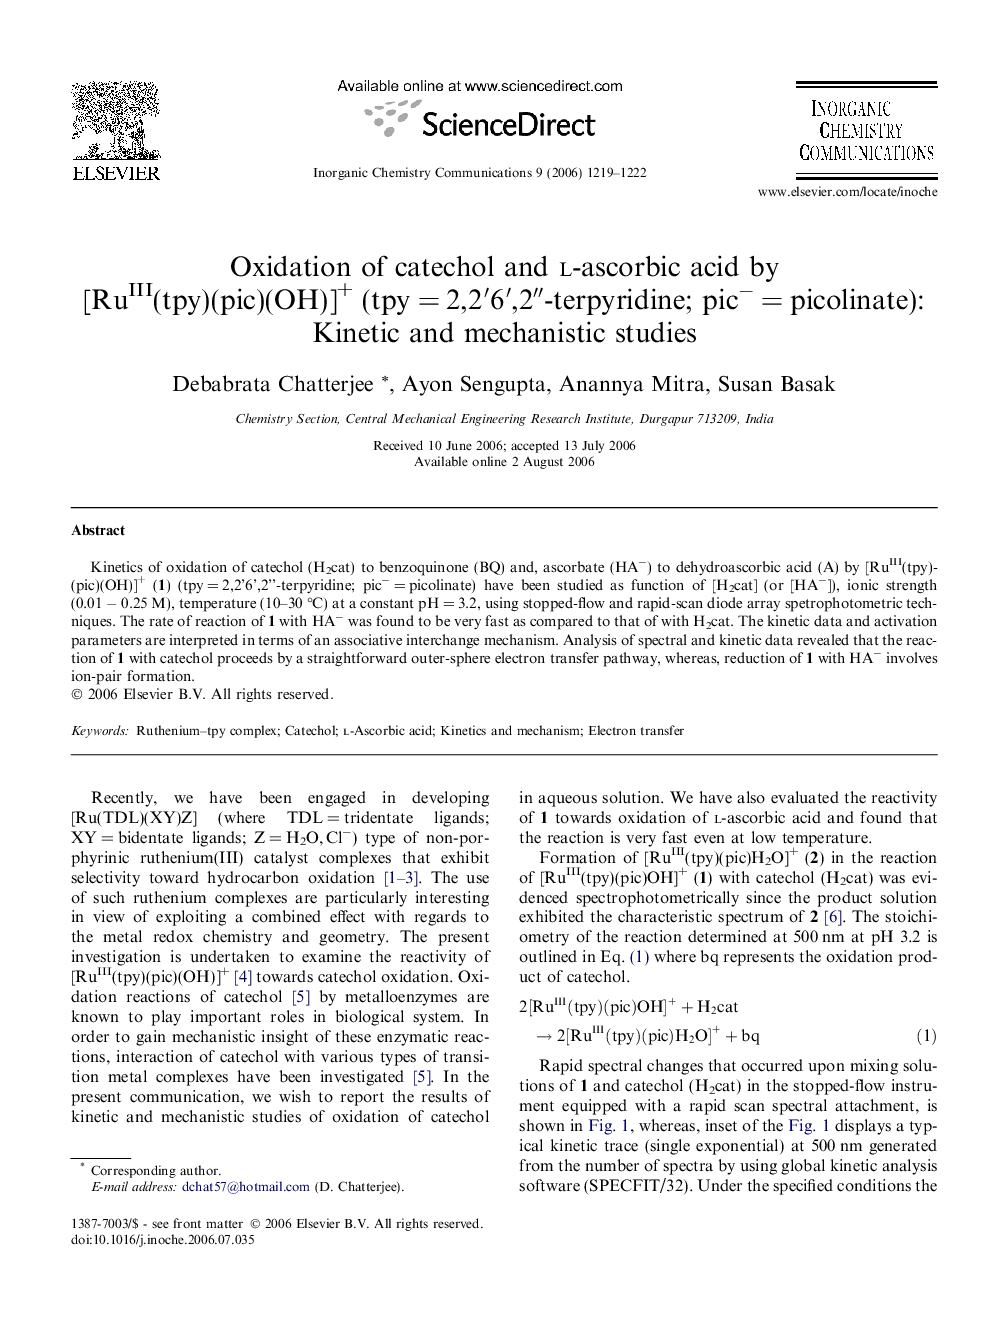 Oxidation of catechol and l-ascorbic acid by [RuIII(tpy)(pic)(OH)]+ (tpy = 2,2′6′,2″-terpyridine; pic− = picolinate): Kinetic and mechanistic studies